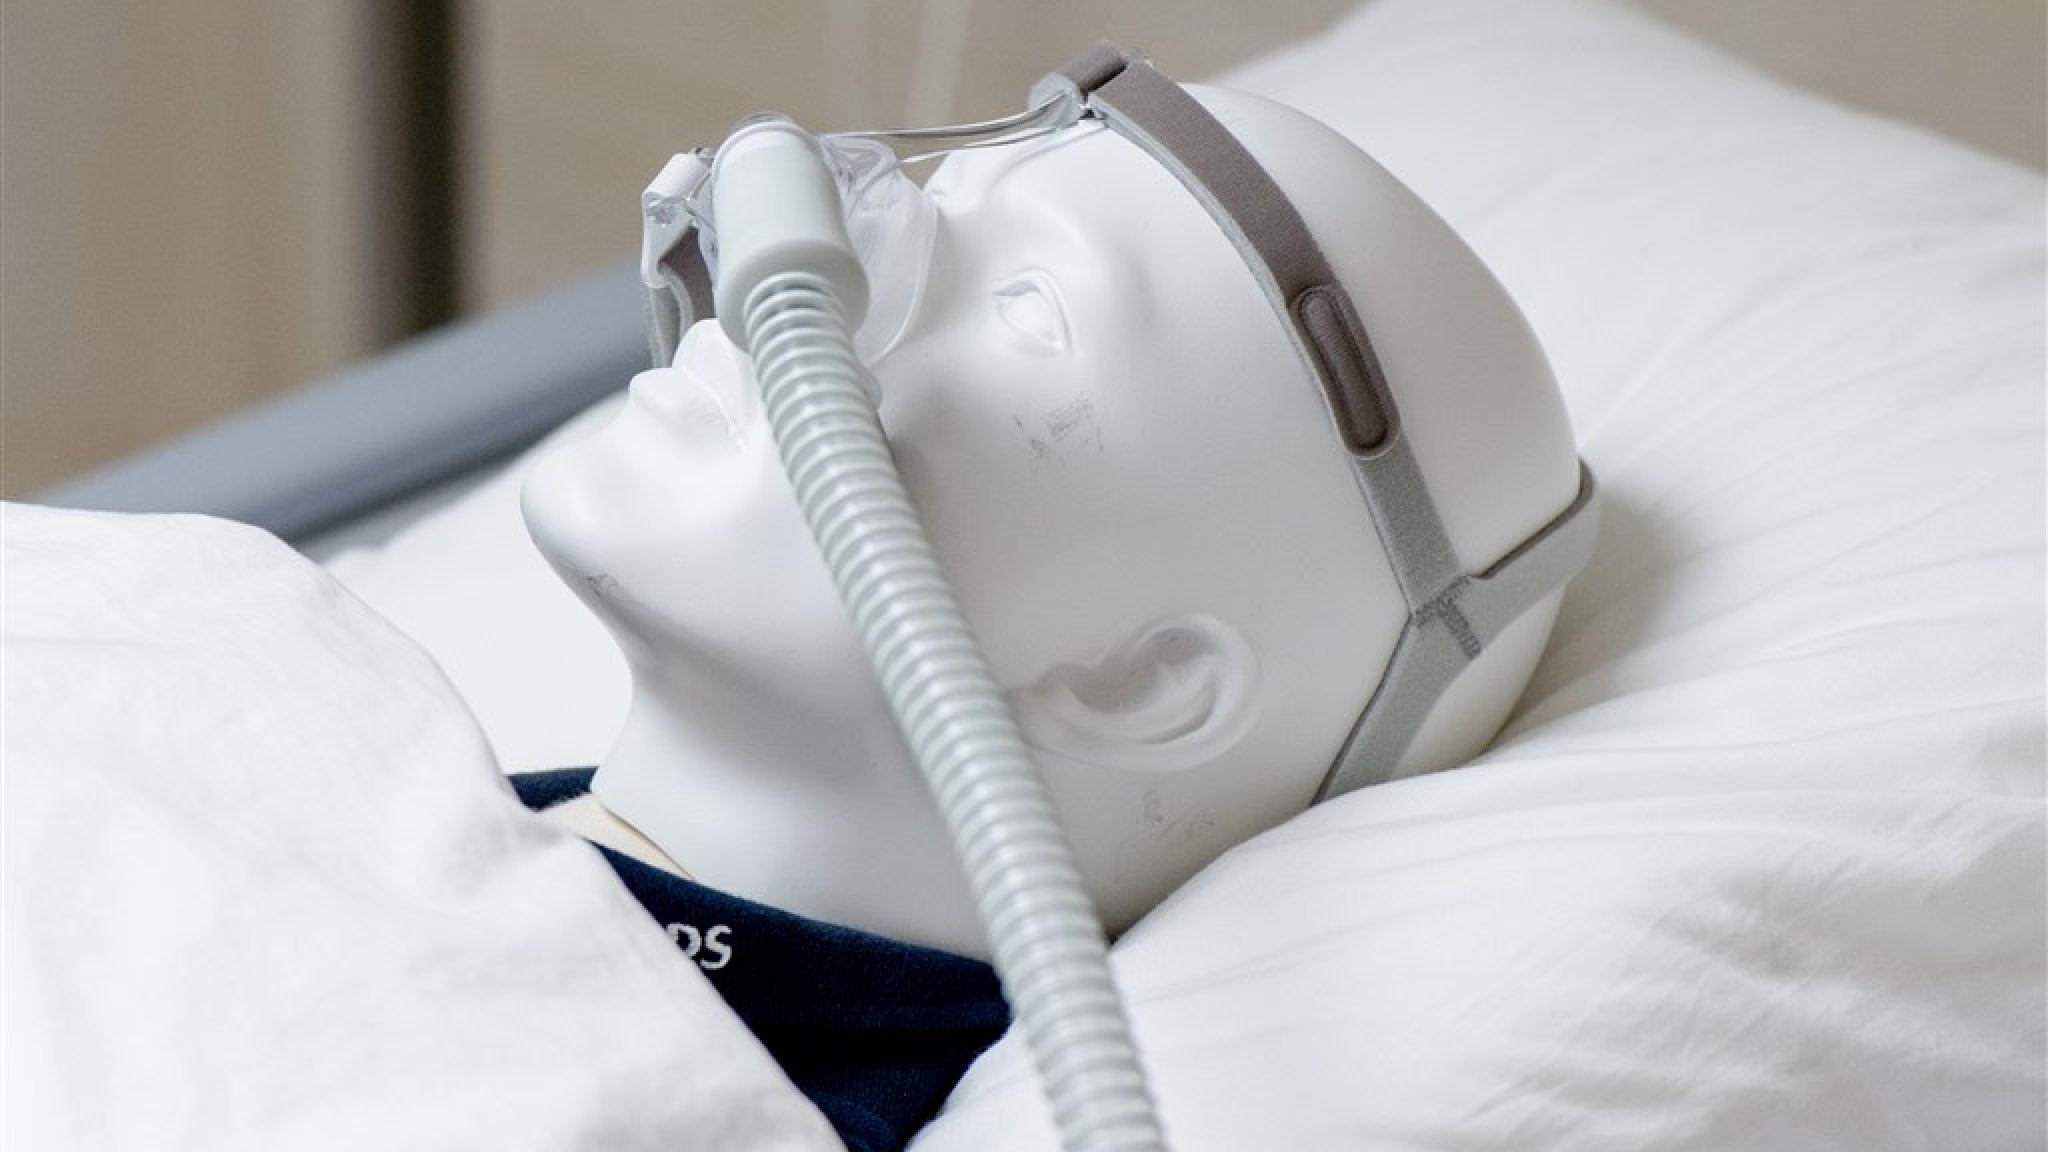 Philips mired in lawsuits over dangerous sleeping devices